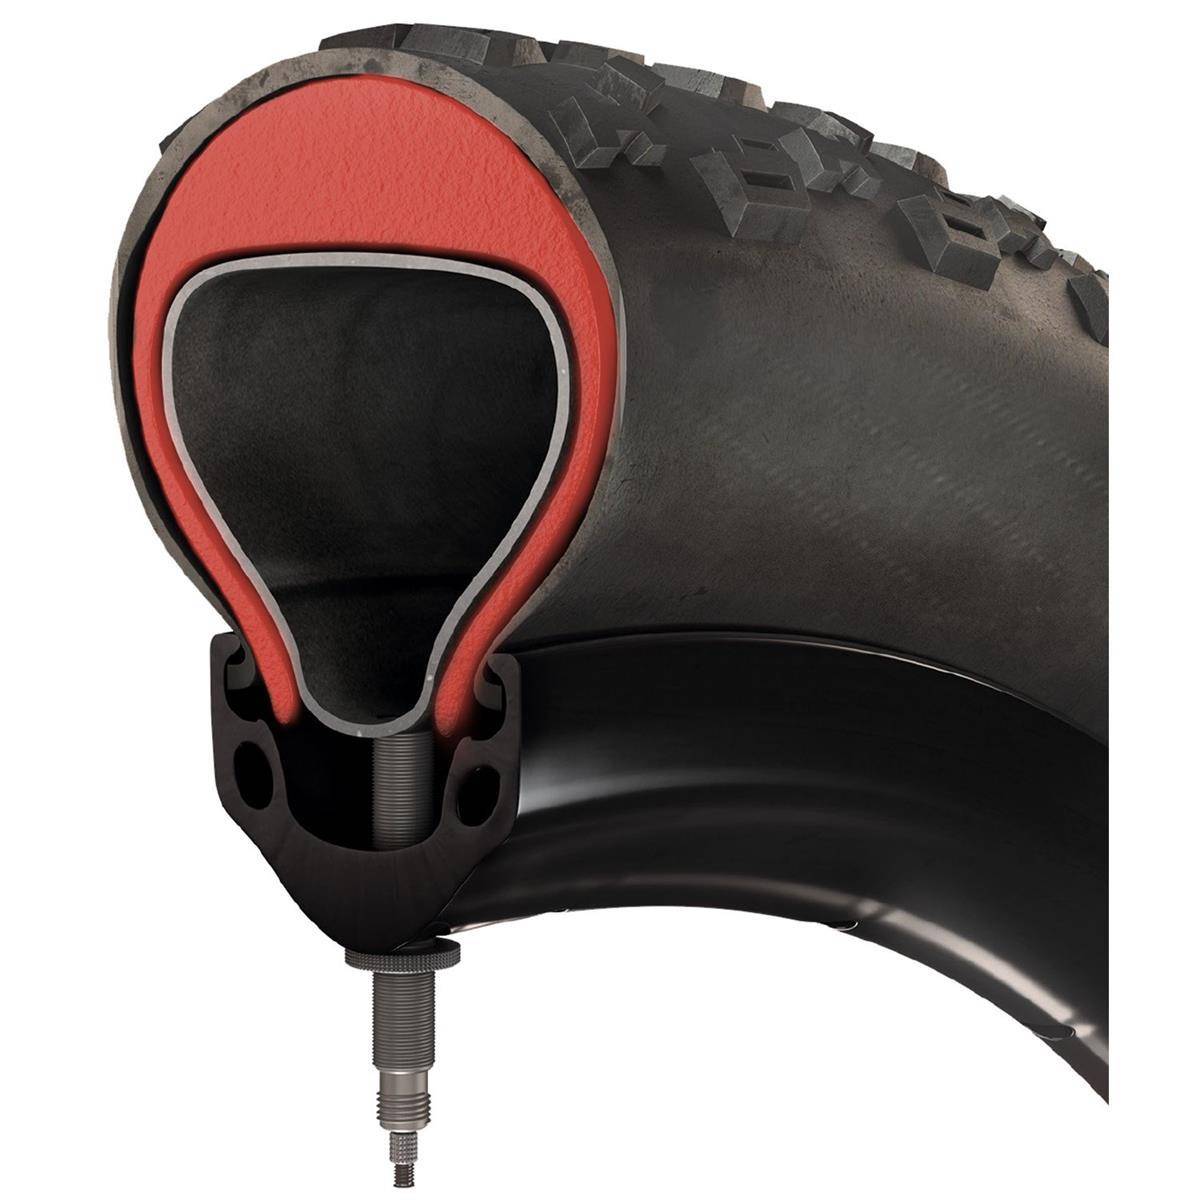 Tannus presents Armor; the antipuncture solution for inner tubes